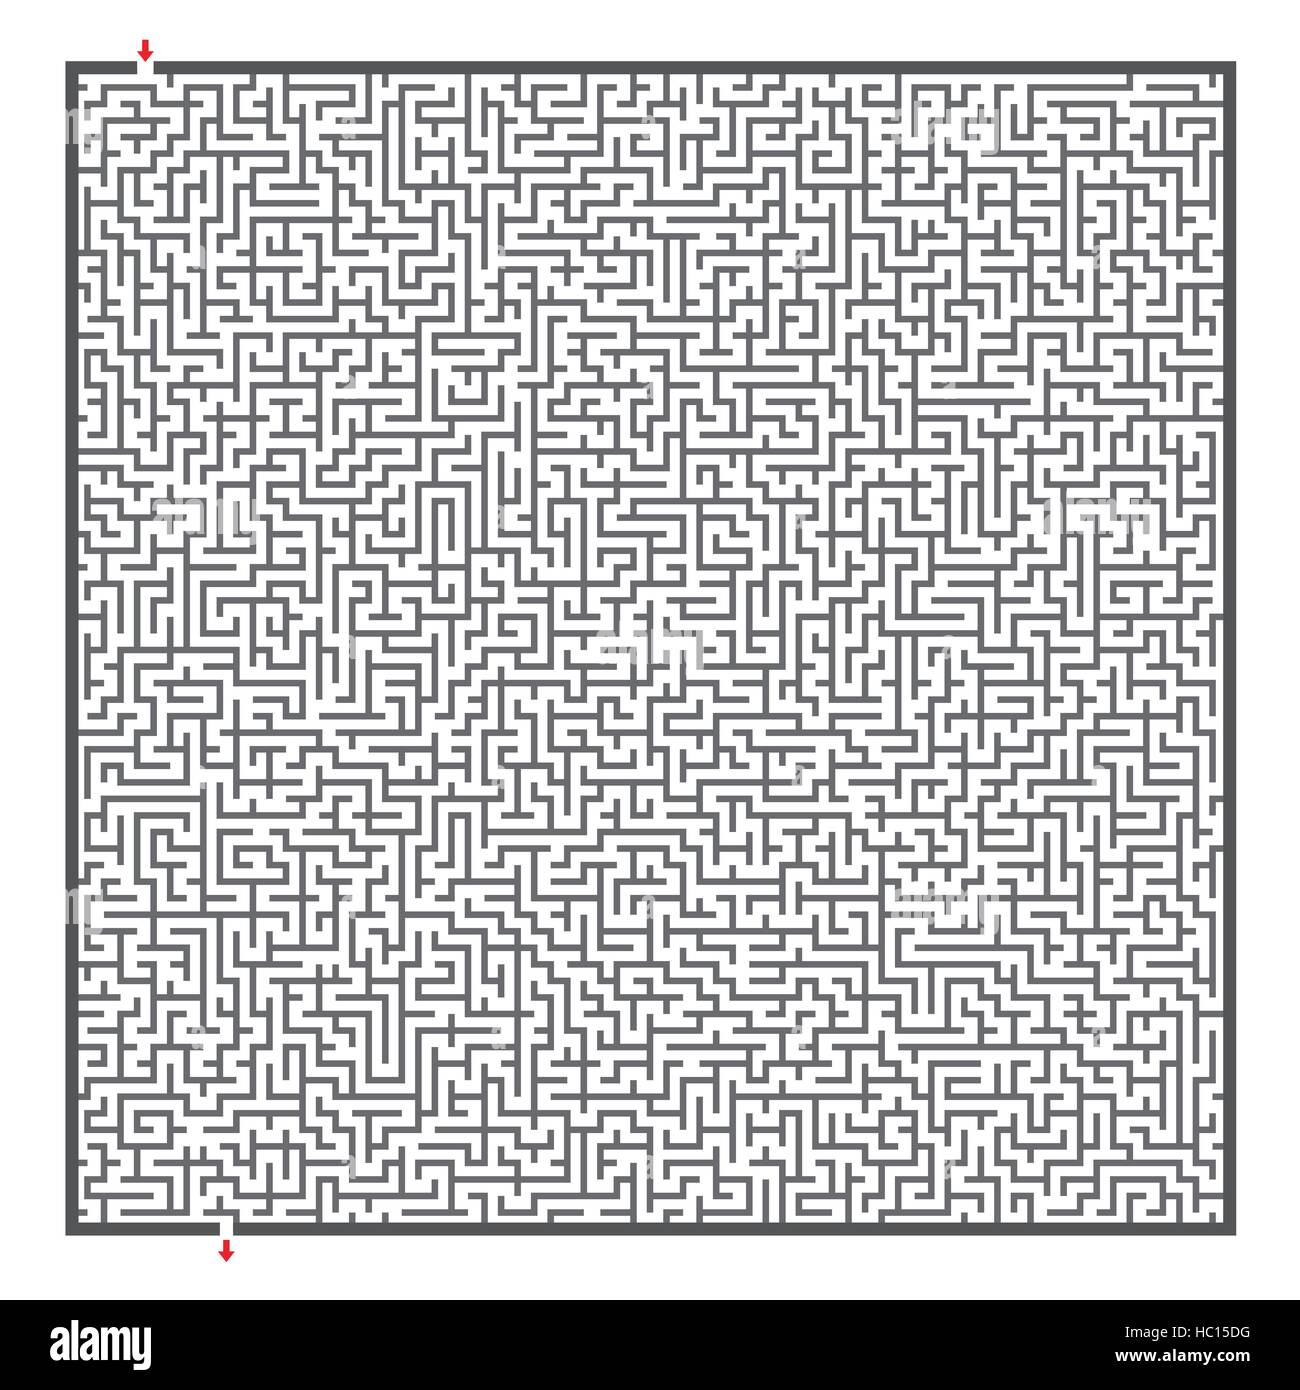 complex square maze isolated on white background Stock Vector